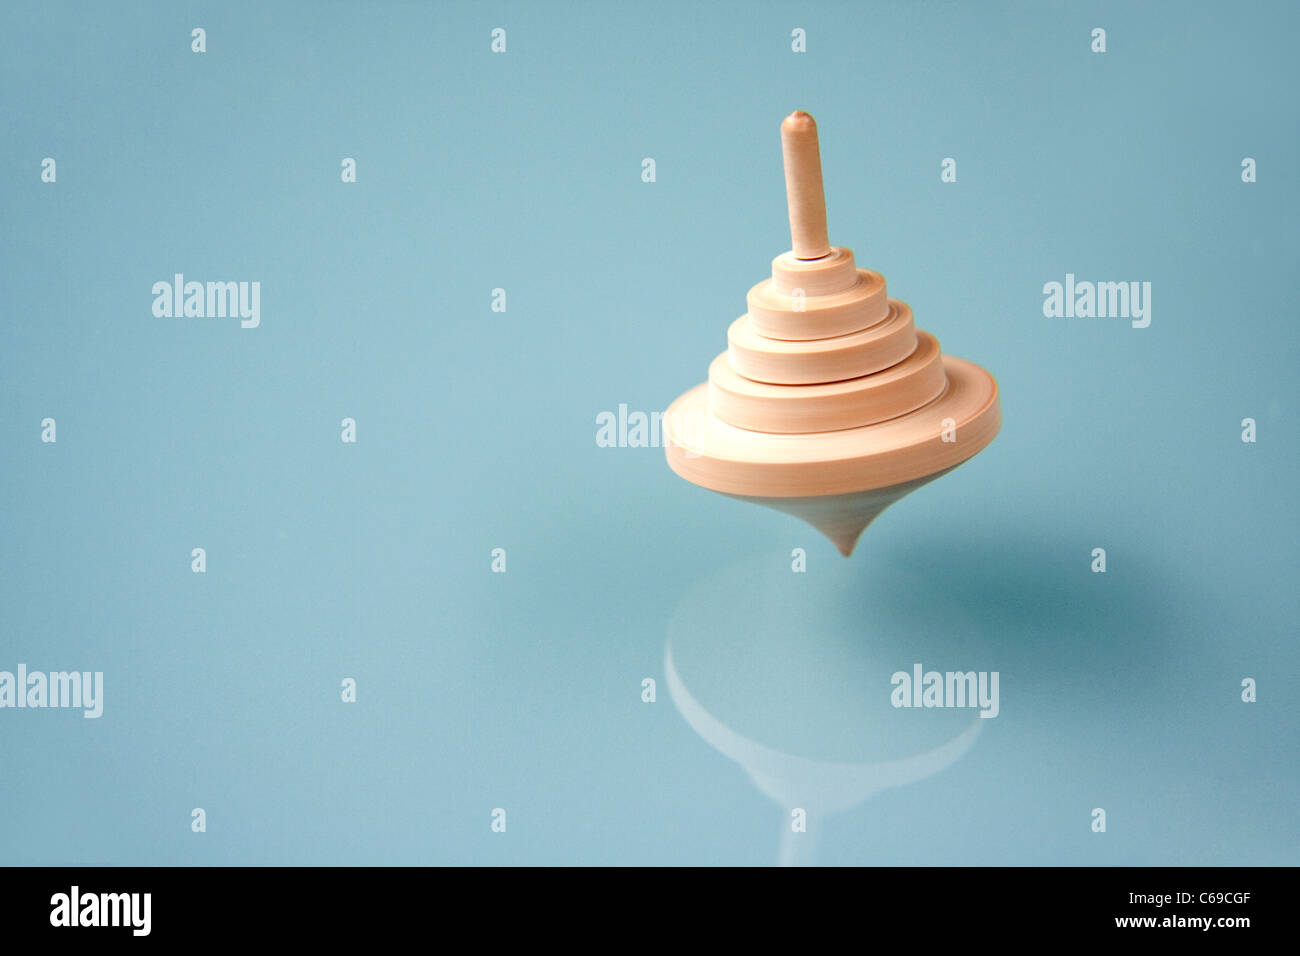 Spinning Top Toy Stock Photo